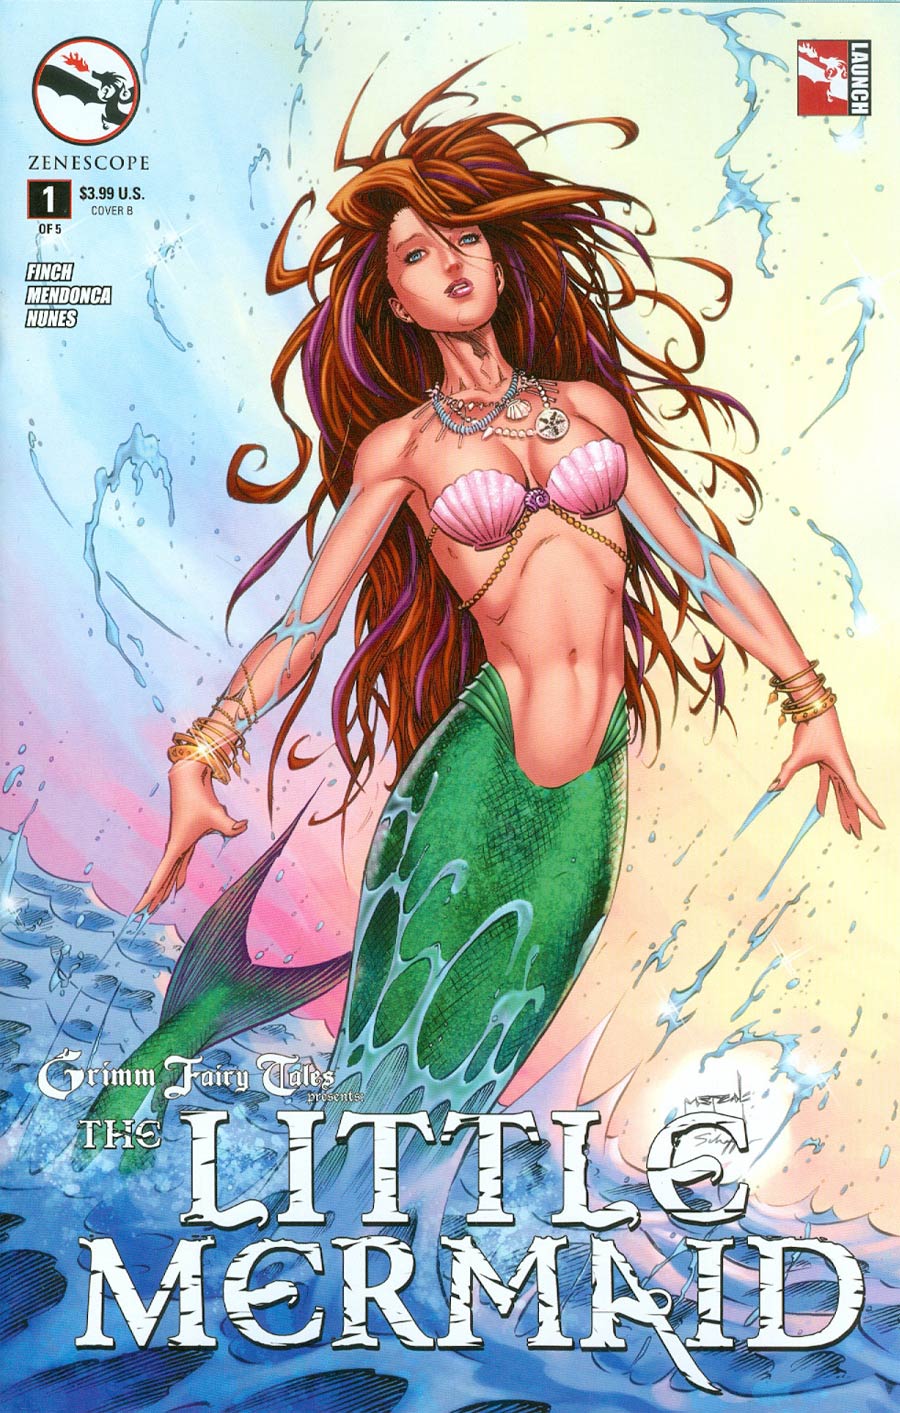 Grimm Fairy Tales Presents Little Mermaid #1 Cover B Variant Jason Metcalf Cover